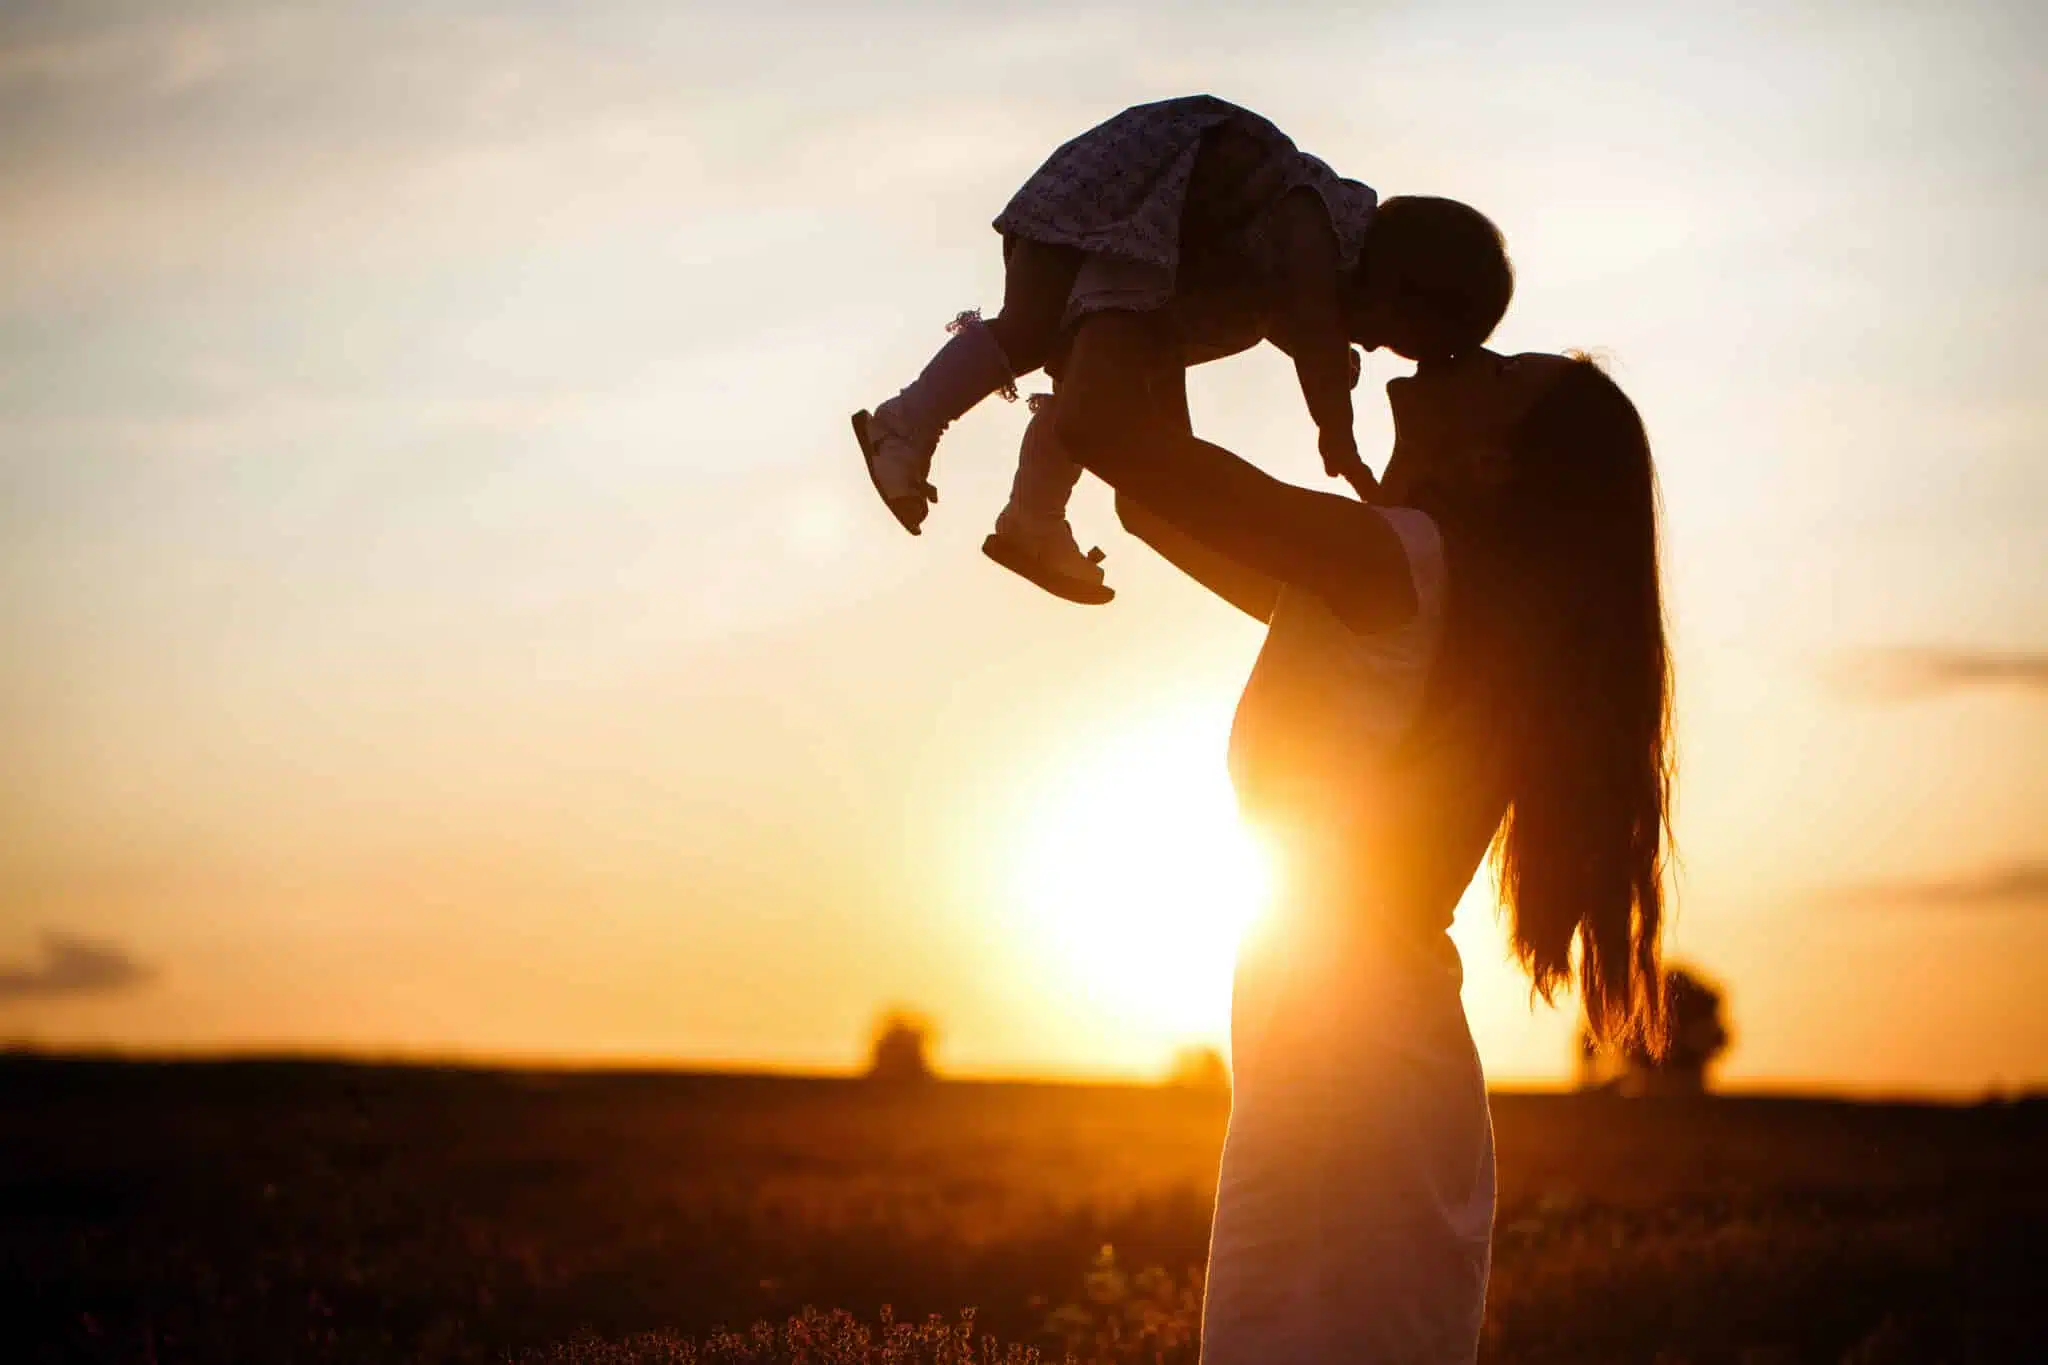 A mother lifts a toddler child in the air above a picturesque sunset sky. A woman and a little girl in a field of lavender flowers